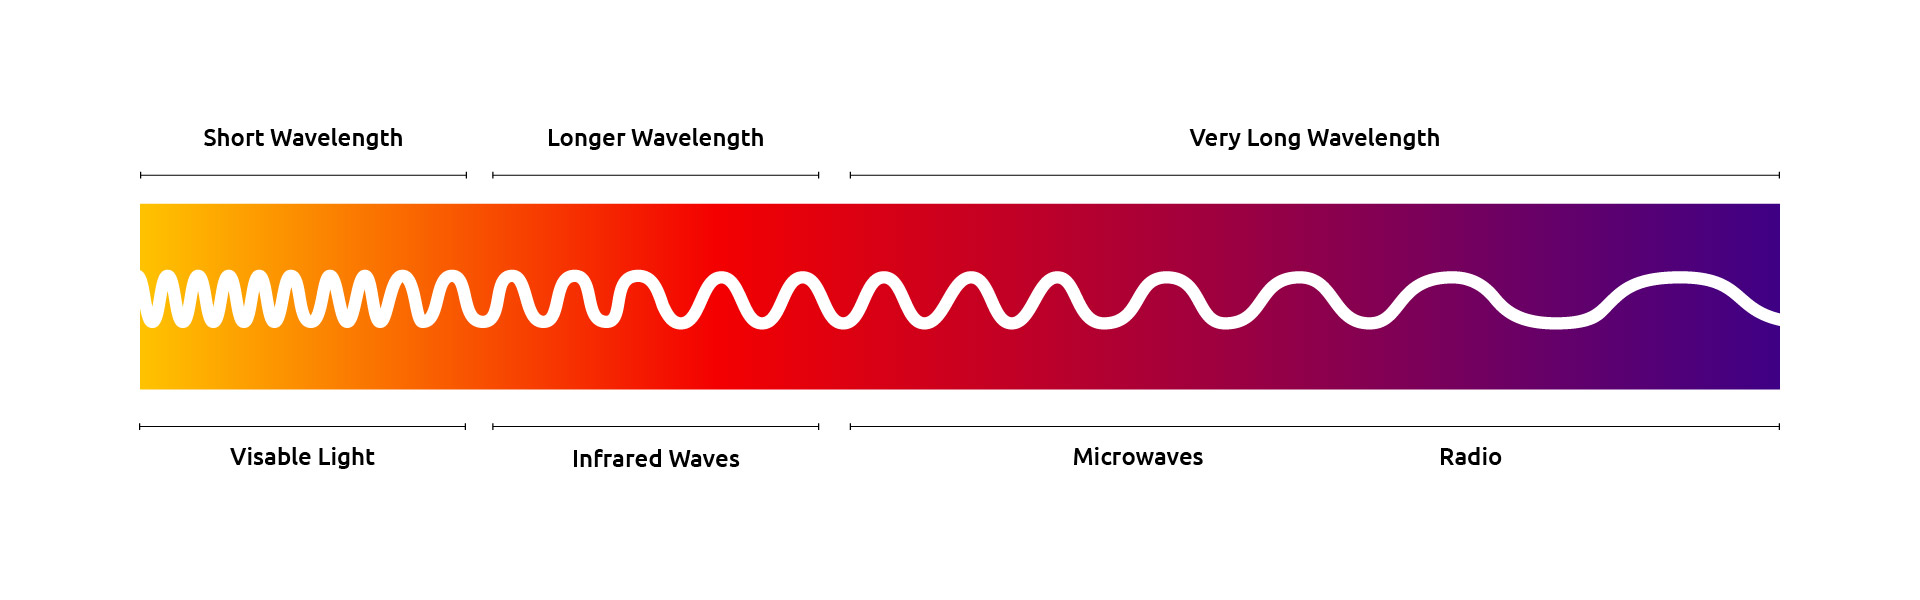 Visible Light, Infrared waves and Microwave graphic representation